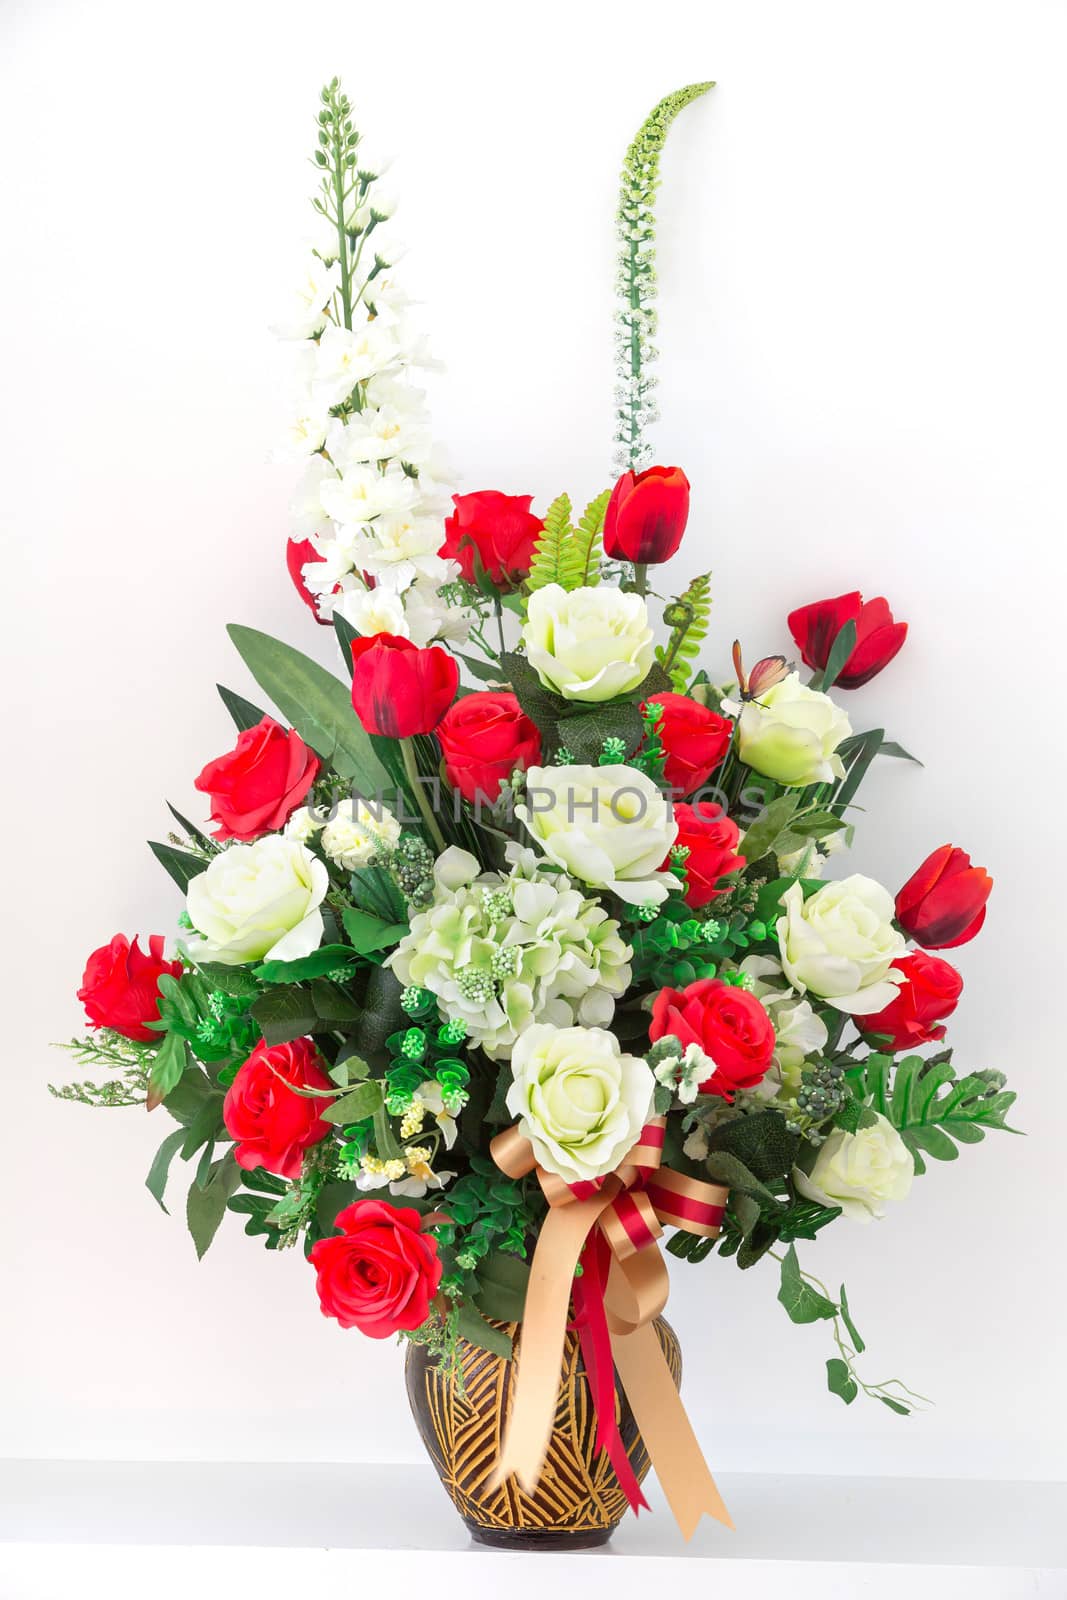 Bouquet of red and white roses by smuay